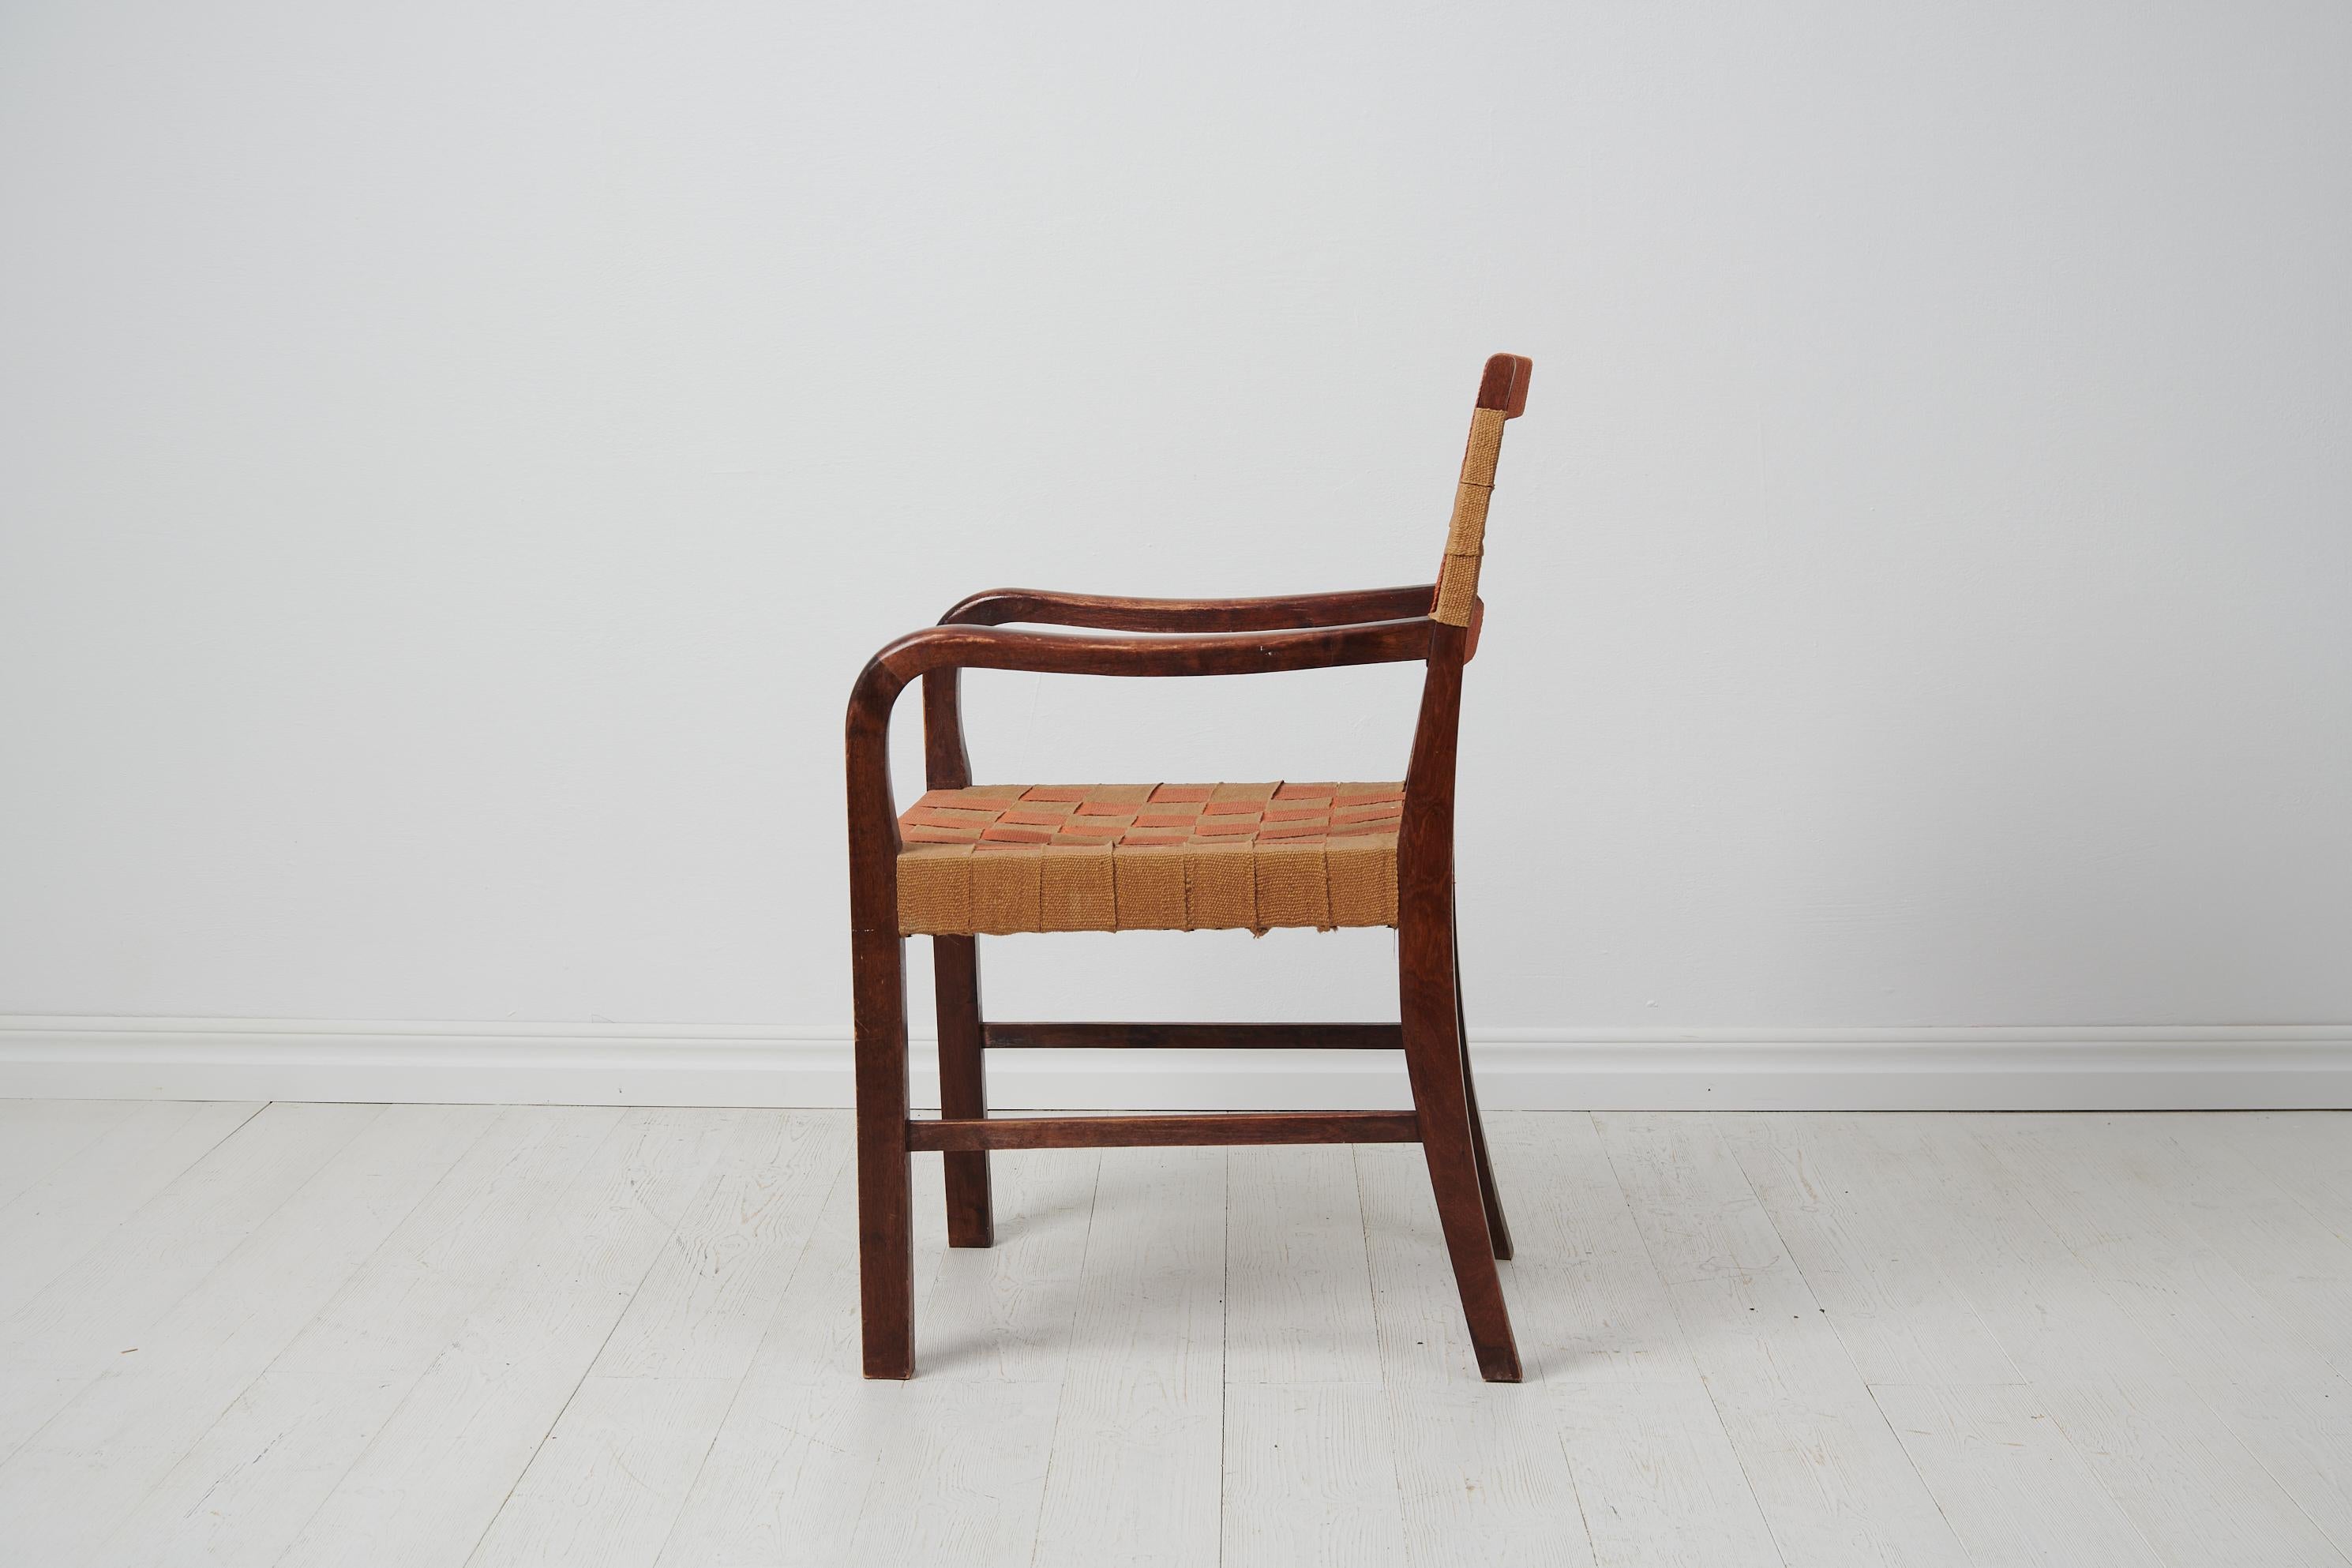 20th Century Swedish Modern Vintage Armchair, 1920 to 1930 For Sale